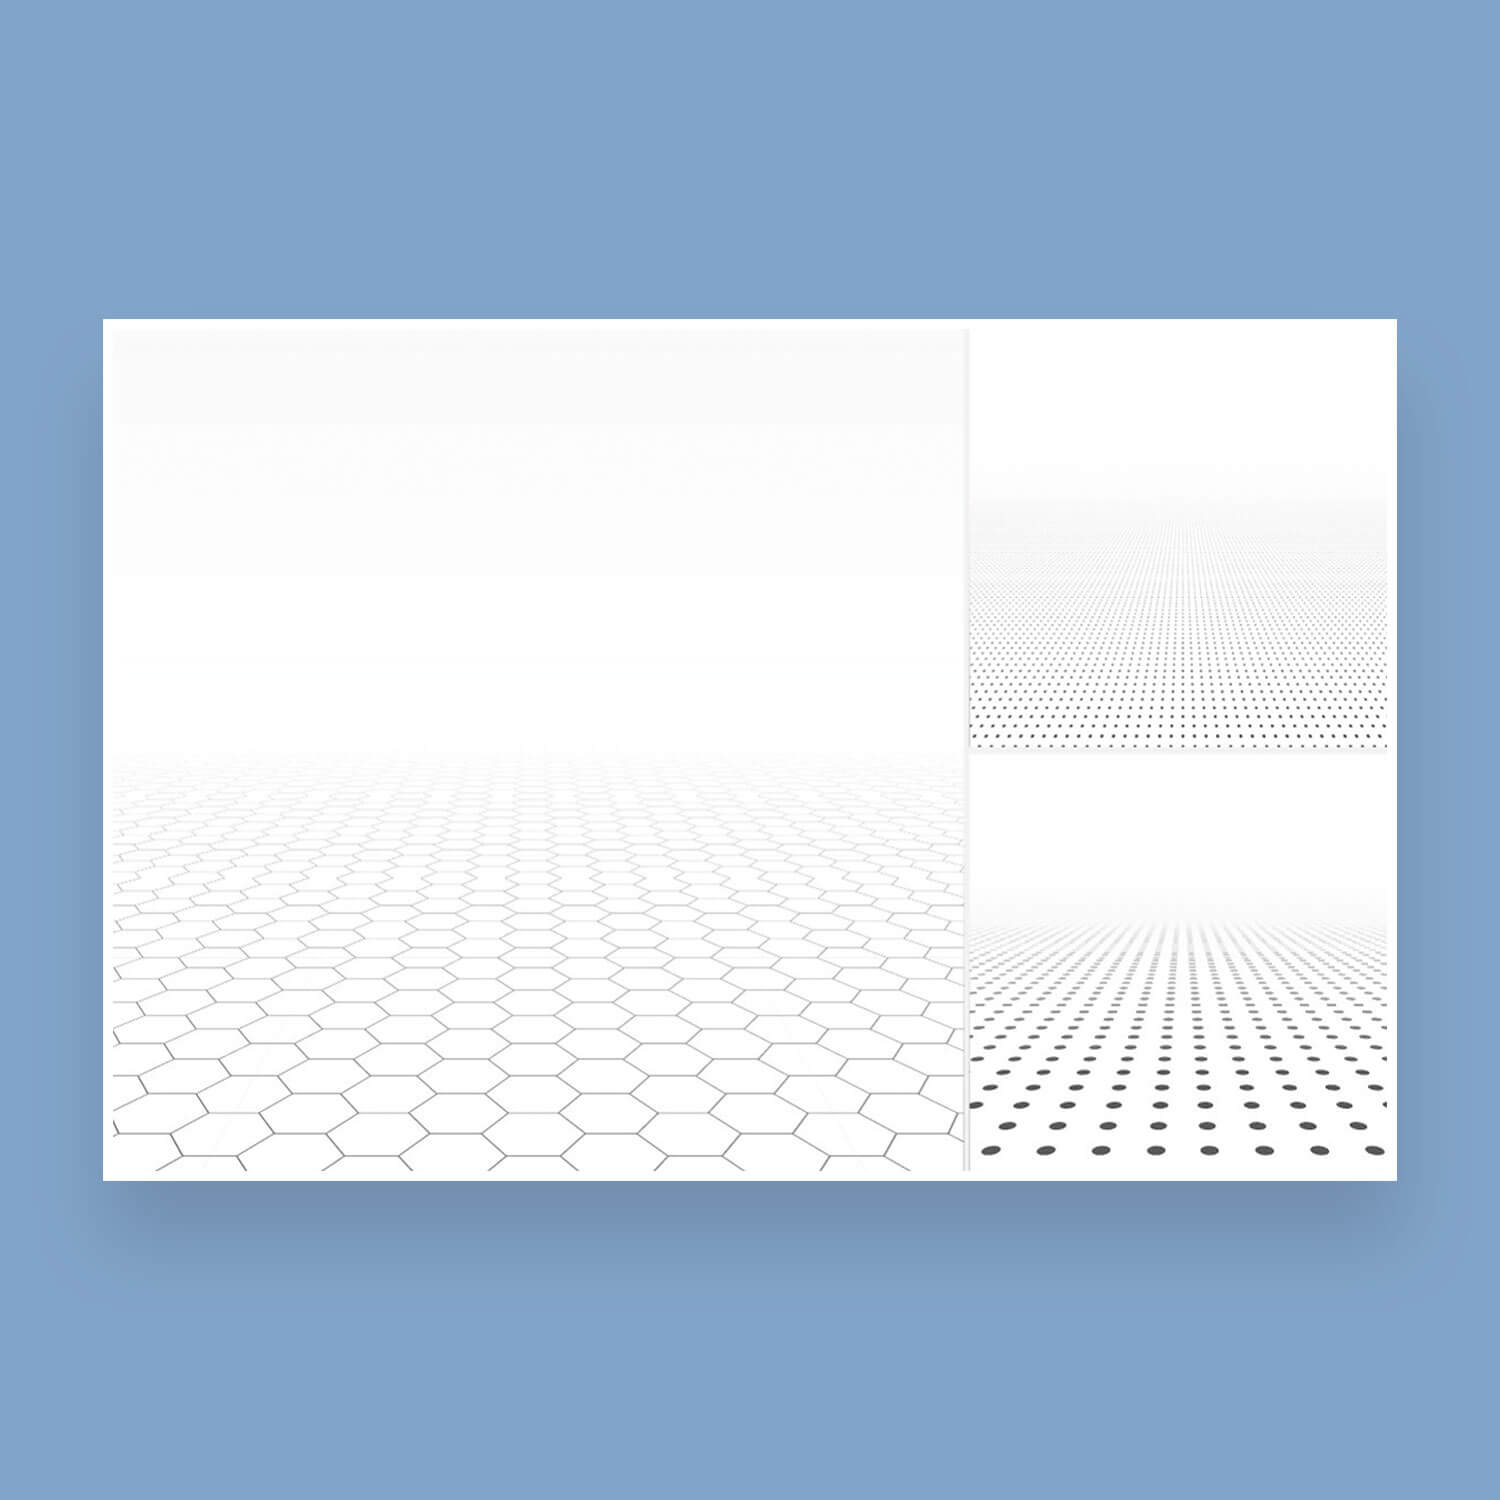 Three patterns of honeycomb and dot patterns on a picture of an abstract background with a white texture perspective.